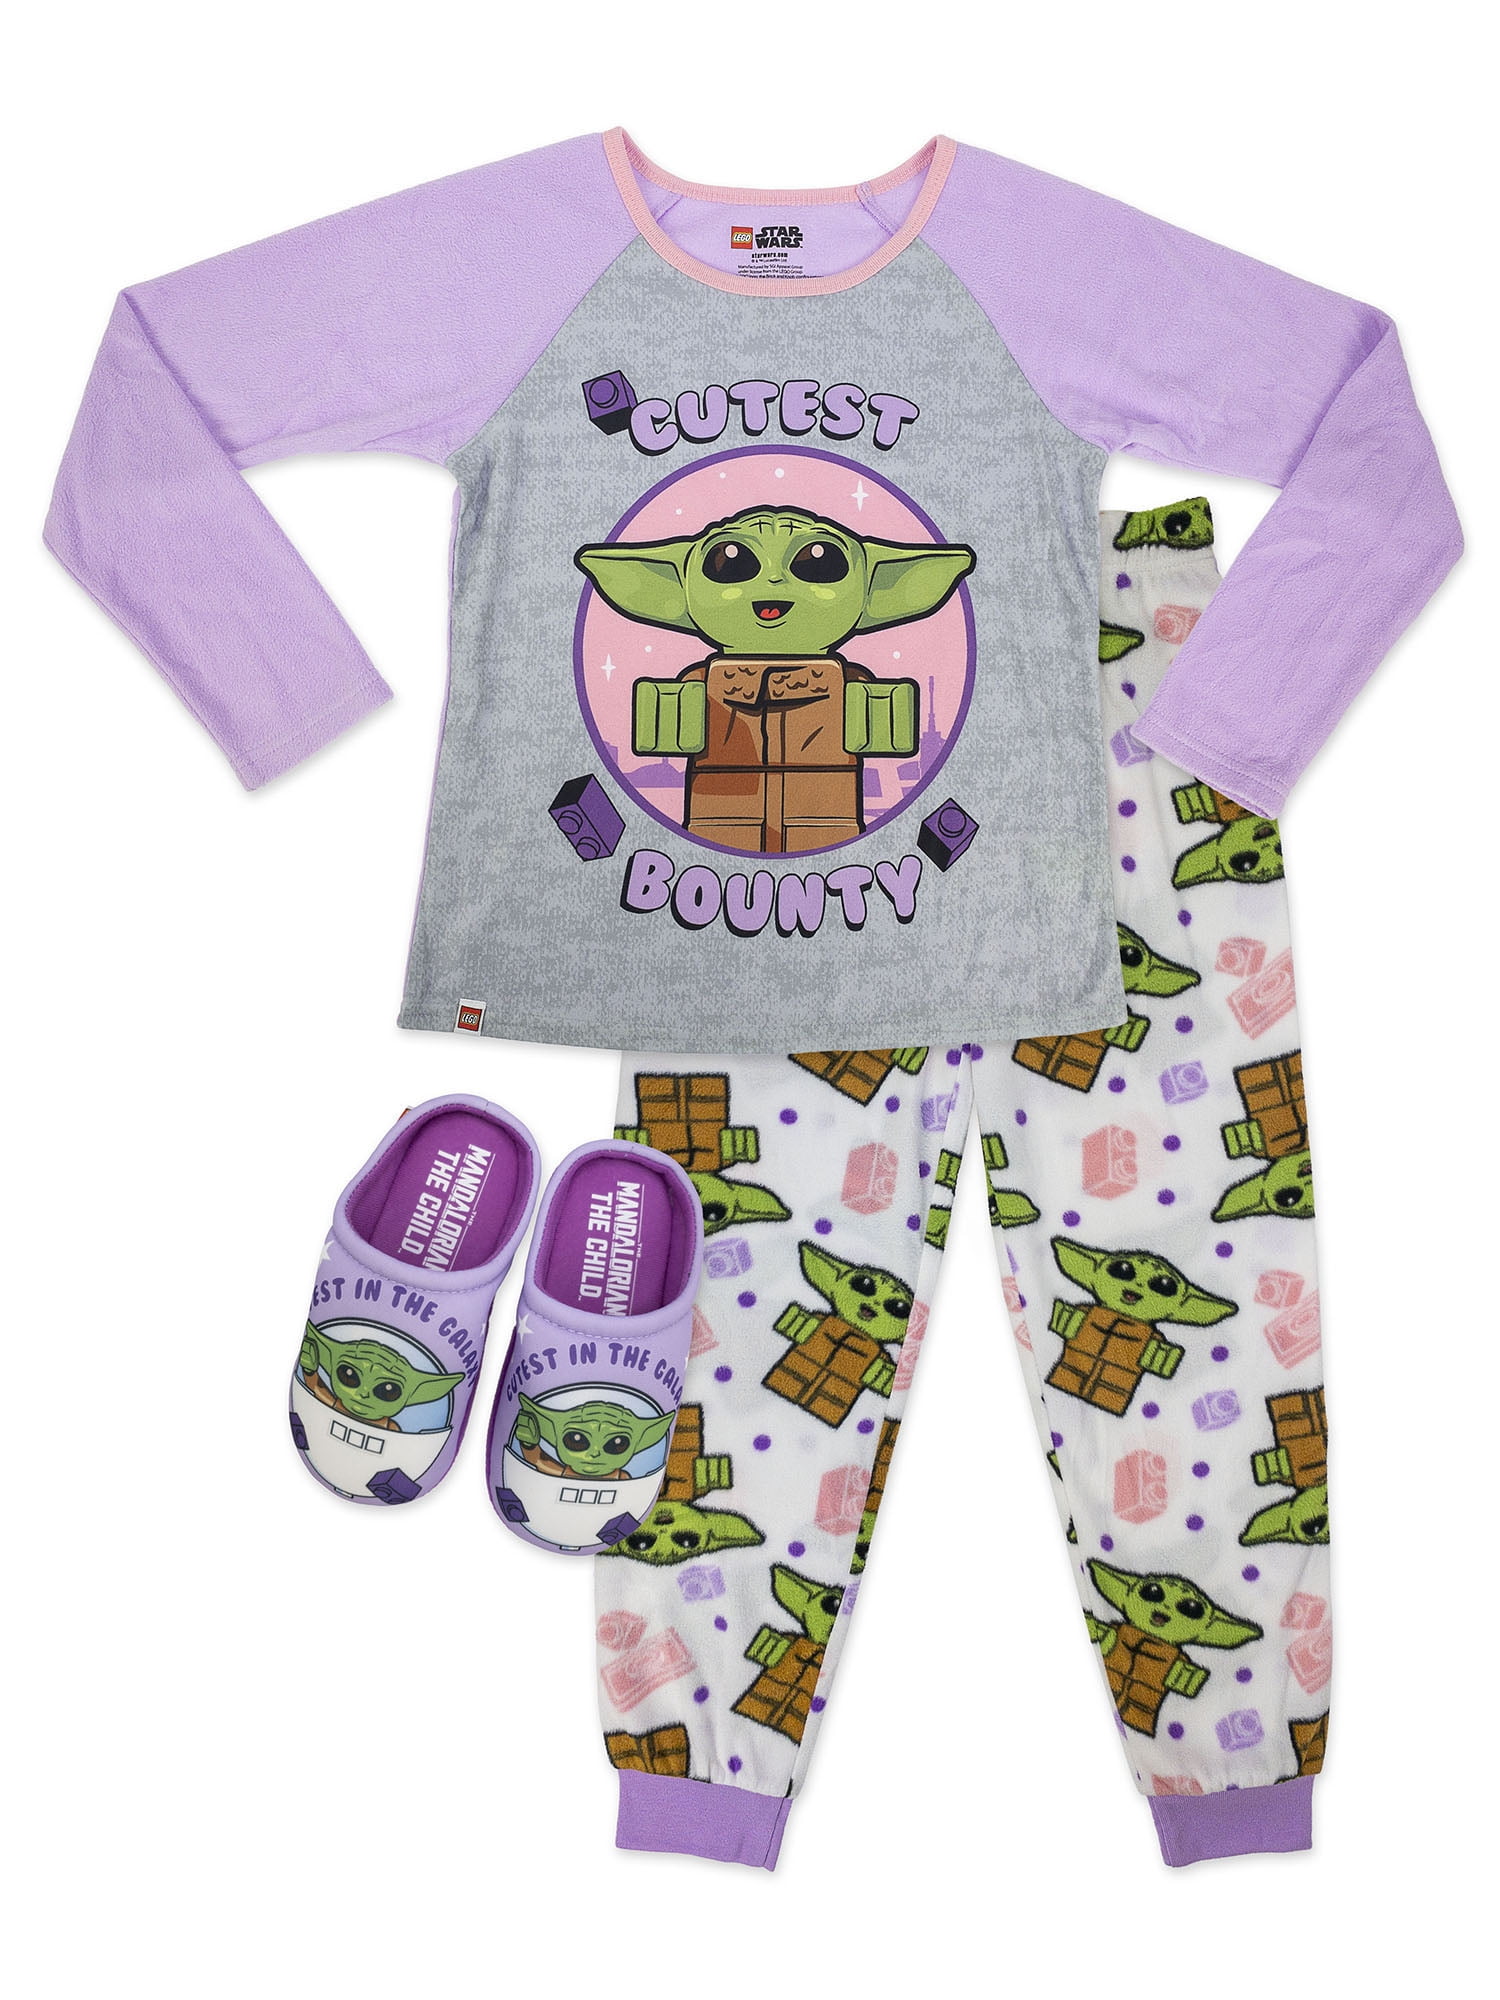 Baby Yoda PJs with Slippers Lego Star Wars Boys Pajama,Baby Yoda 2 Piece Cotton with Slippers